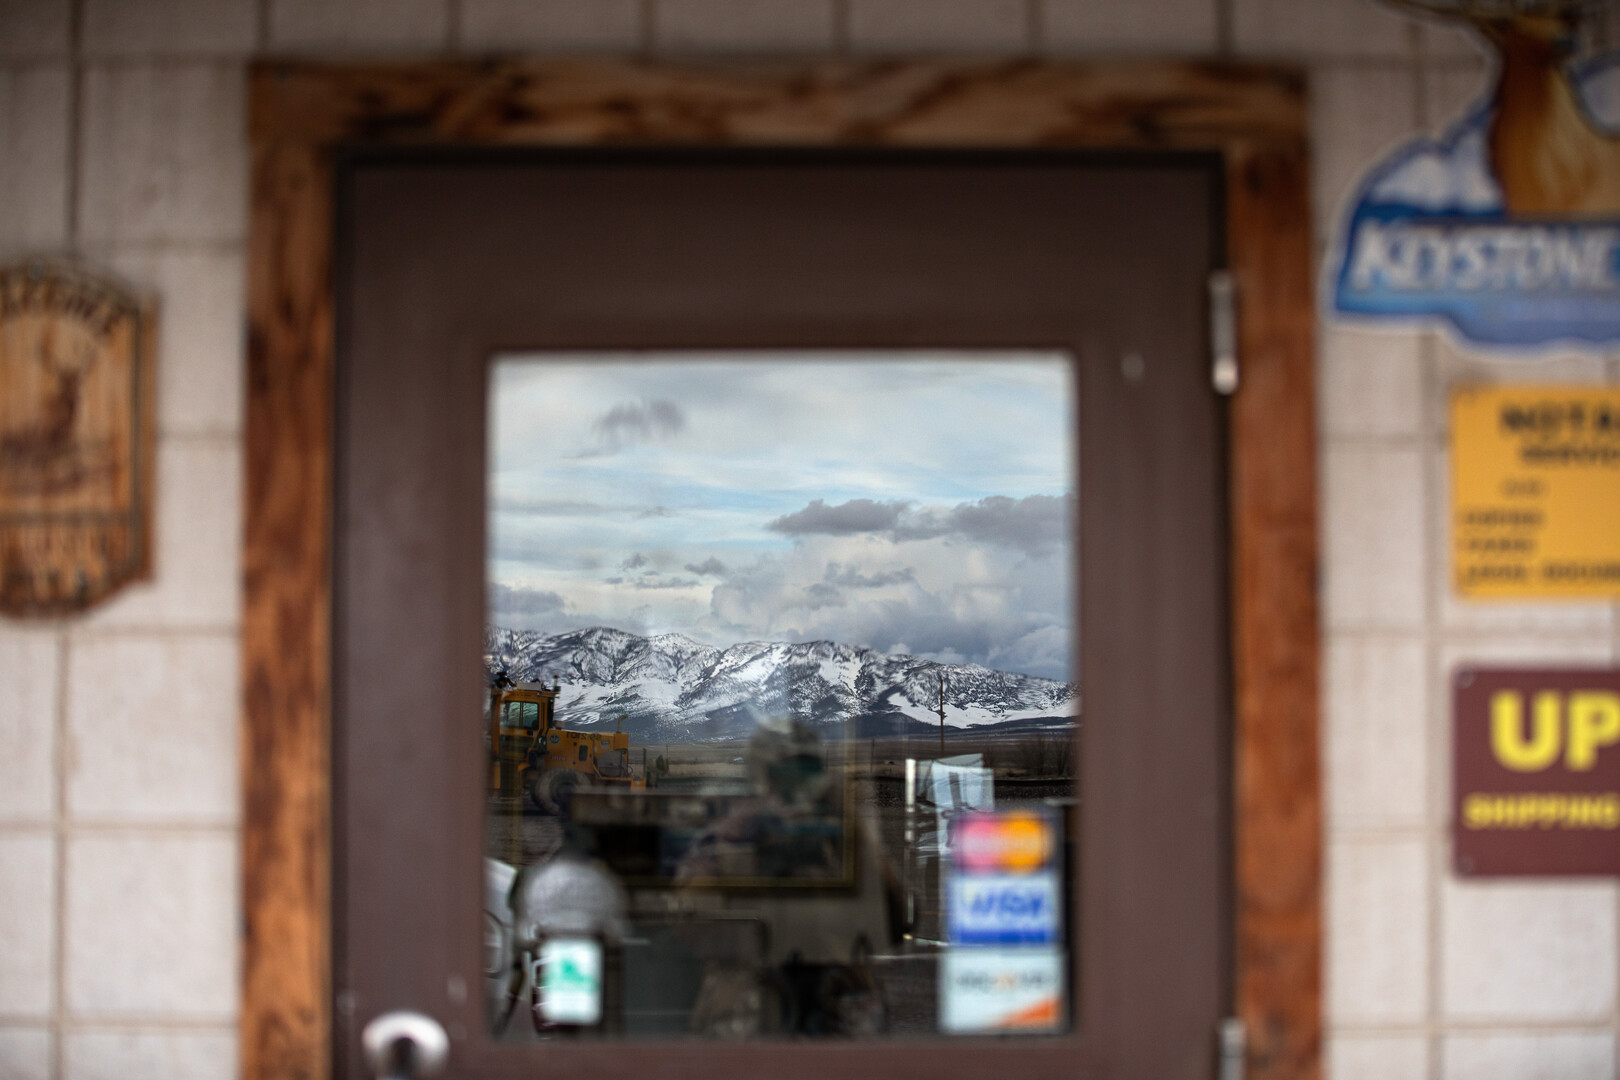 A reflection of the mountains in the window of a closed down store in Utah on March 23, 2023. Photo by Mila Naumovska '26.